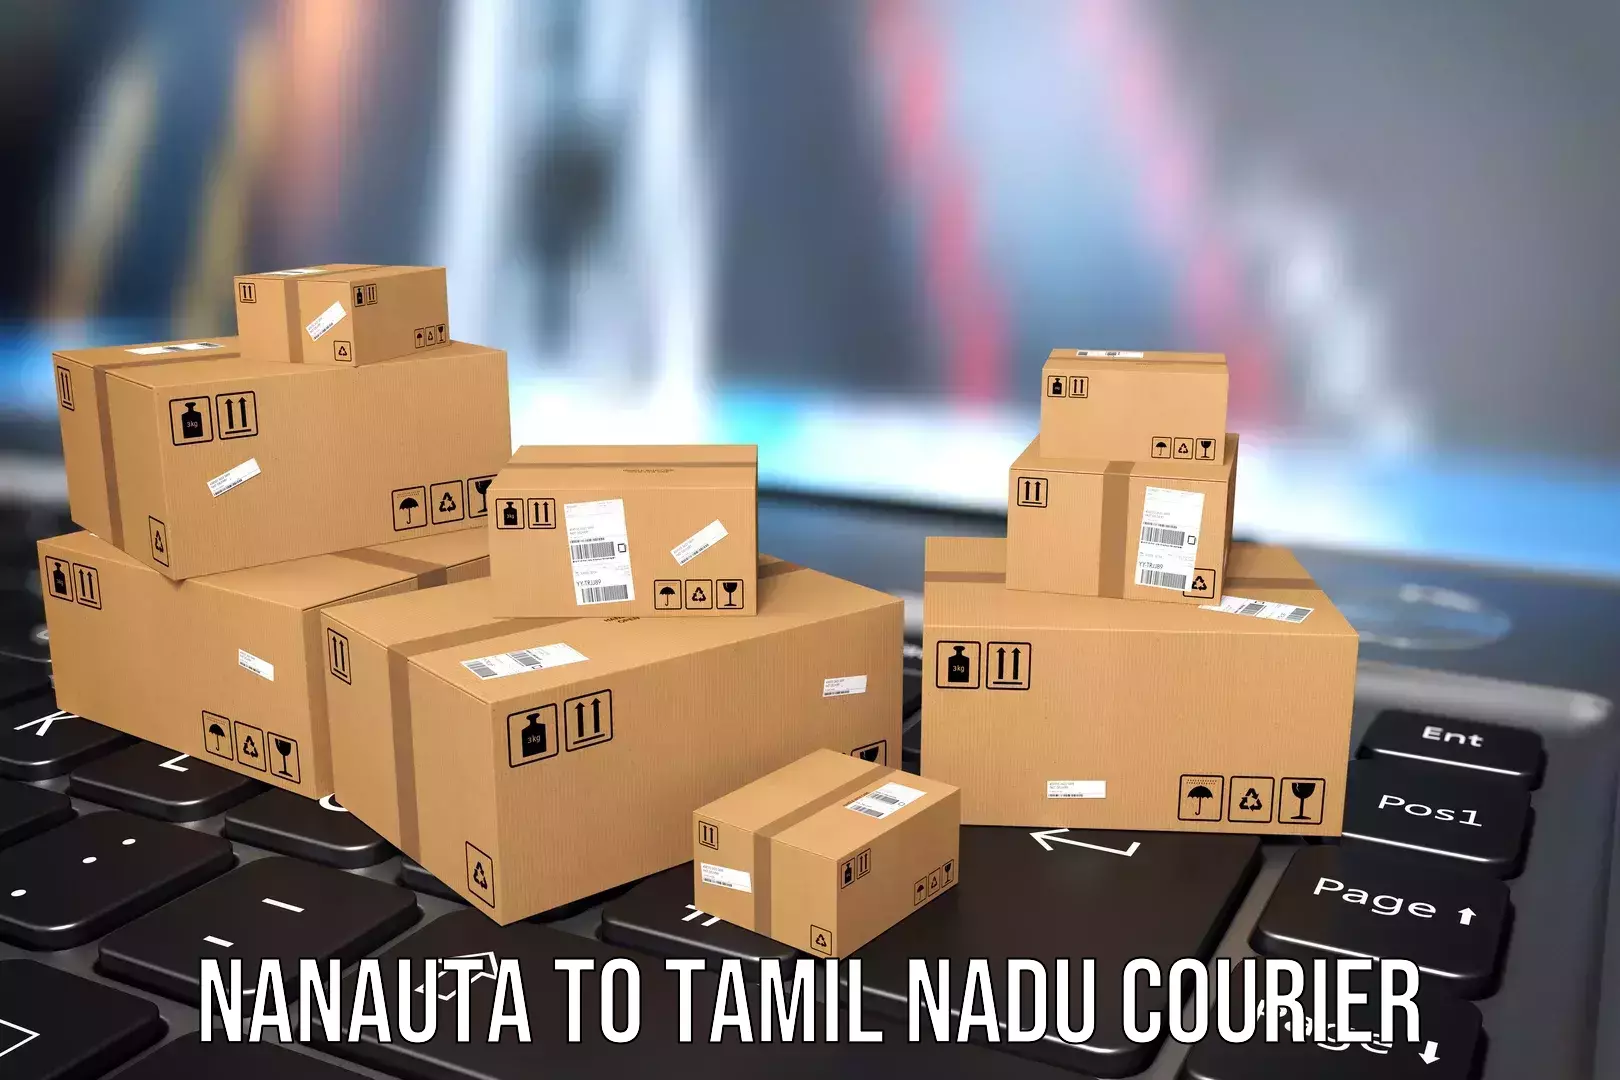 Baggage transport services Nanauta to Sri Ramachandra Institute of Higher Education and Research Chennai